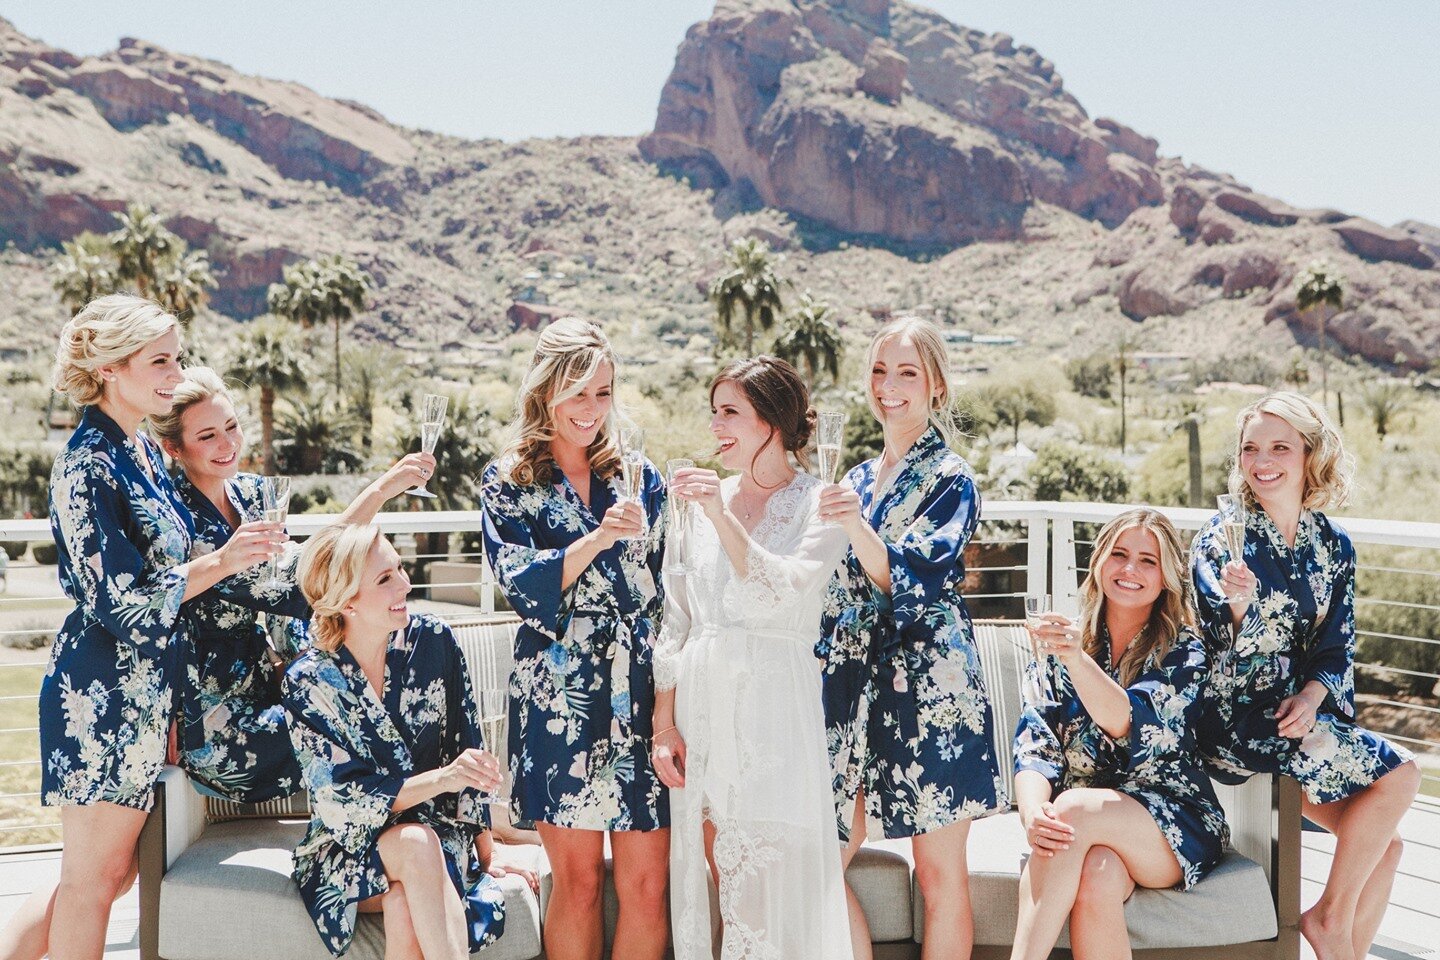 Have you selected your bridal party yet? This can be a big decision. Your bridal party should consist of people whom you know will be by your side, not only on the wedding day but for years to come!